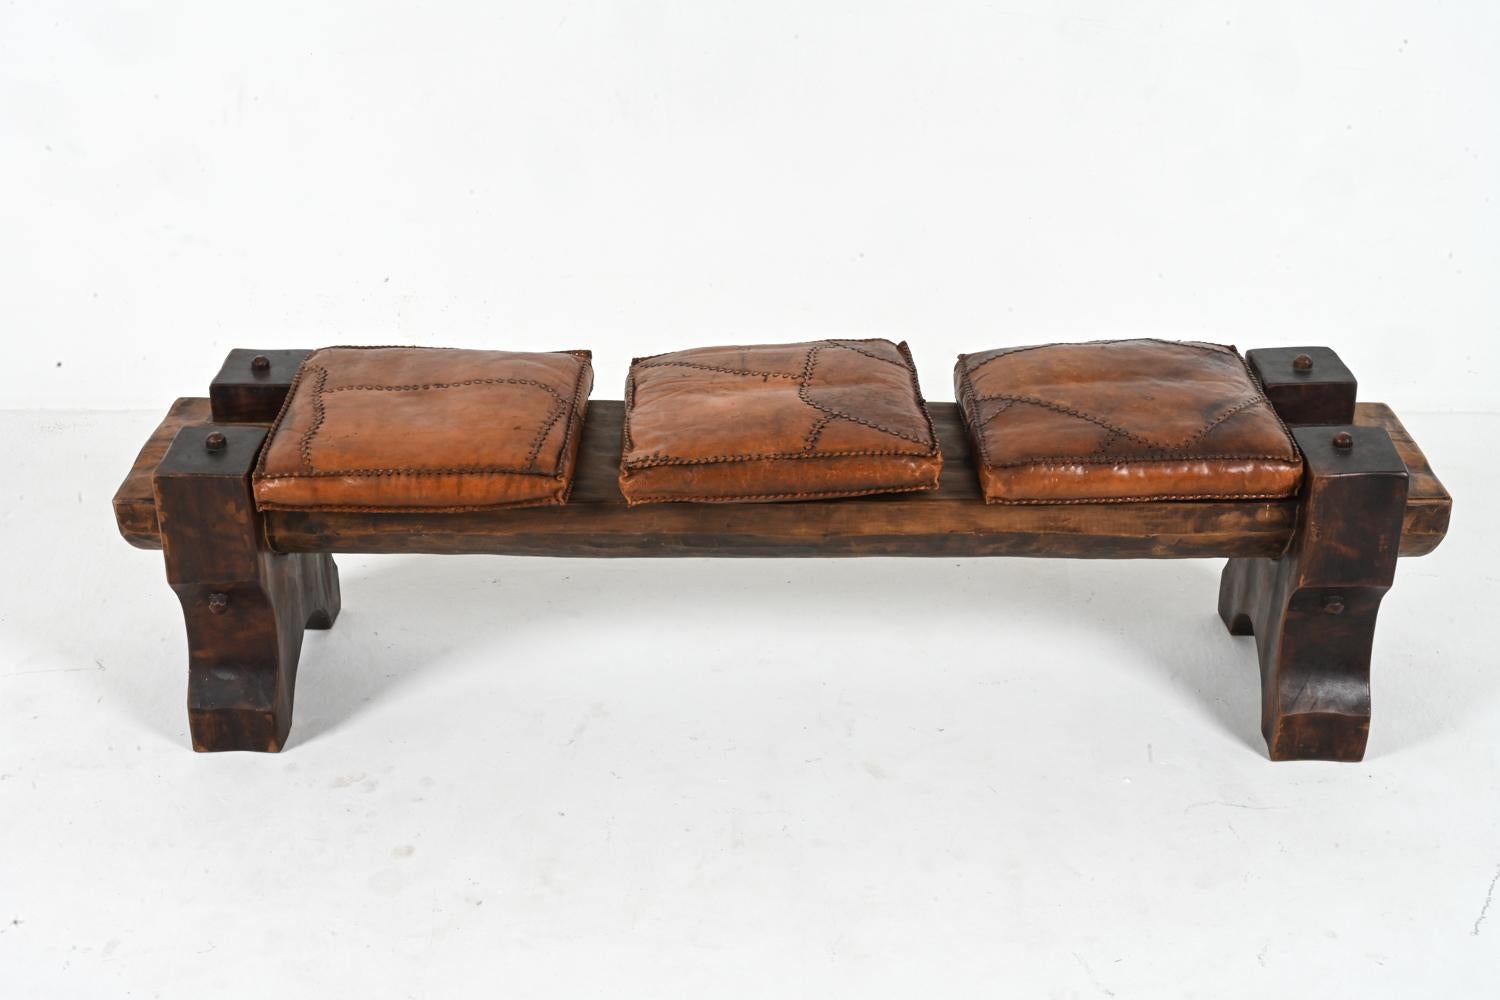 Unknown Brutalist Rough-Hewn Wood & Leather Bench